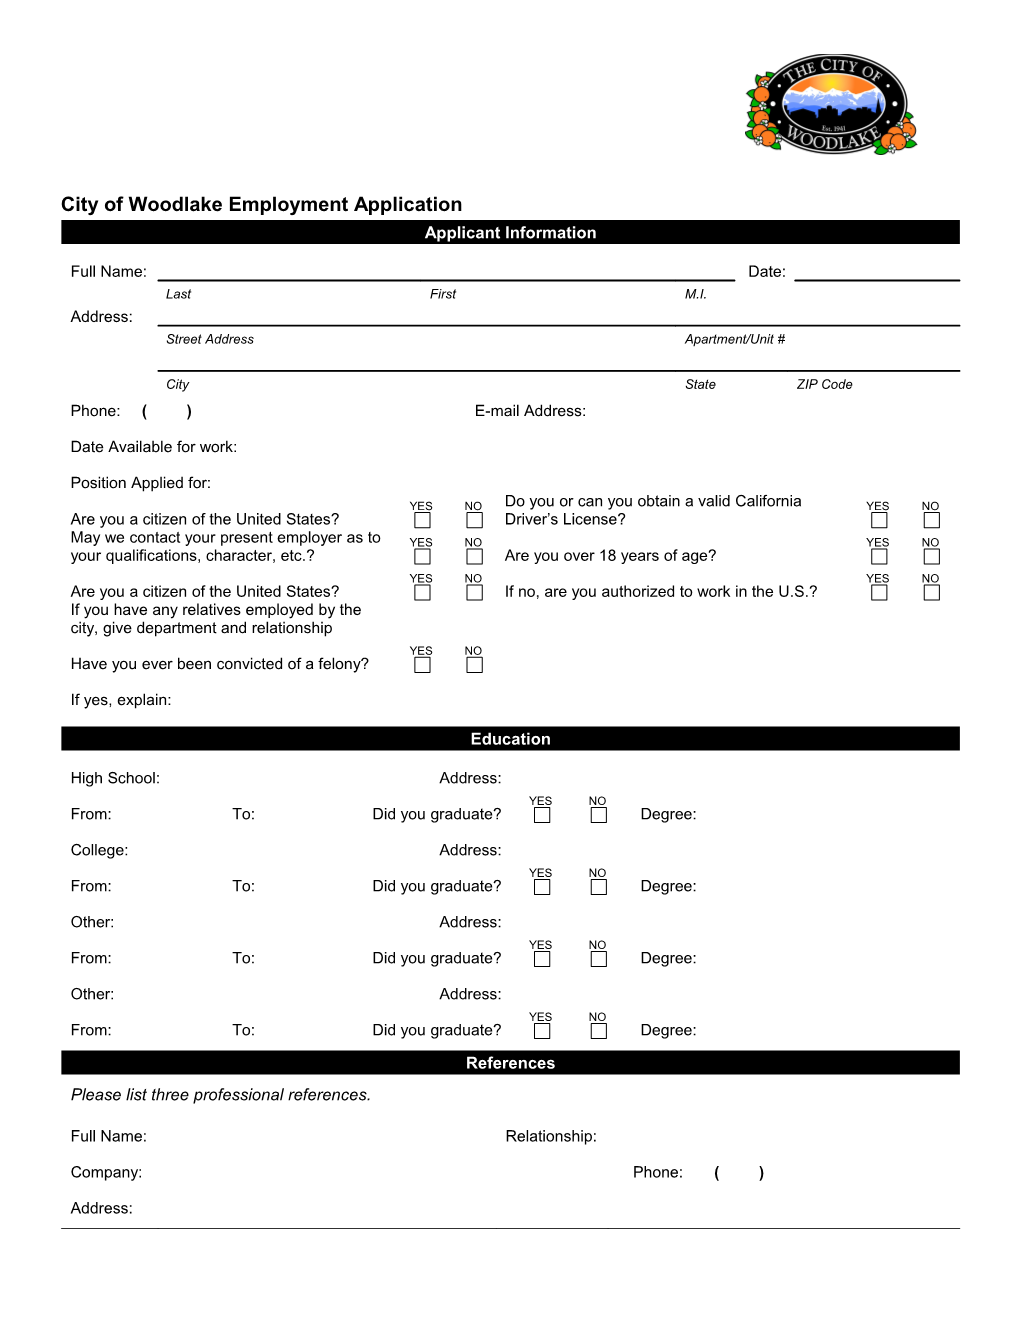 City of Woodlake Employment Application